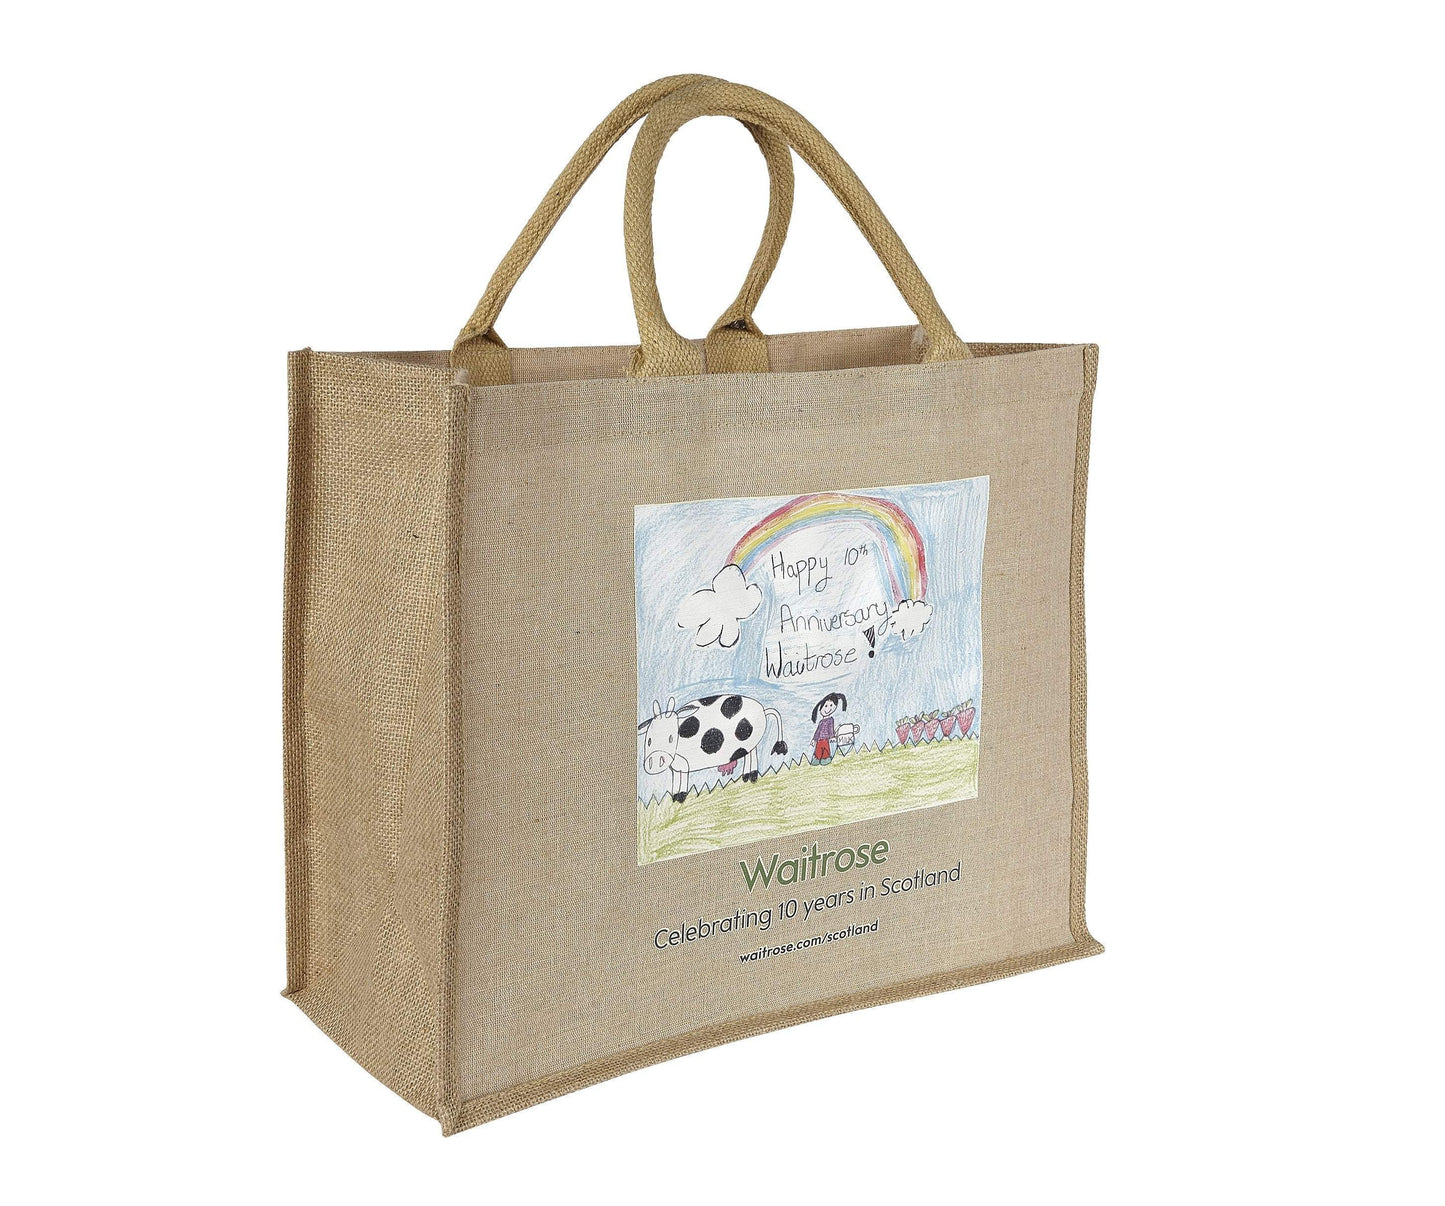 Canberra Jute Bag - Promotions Only Group Limited